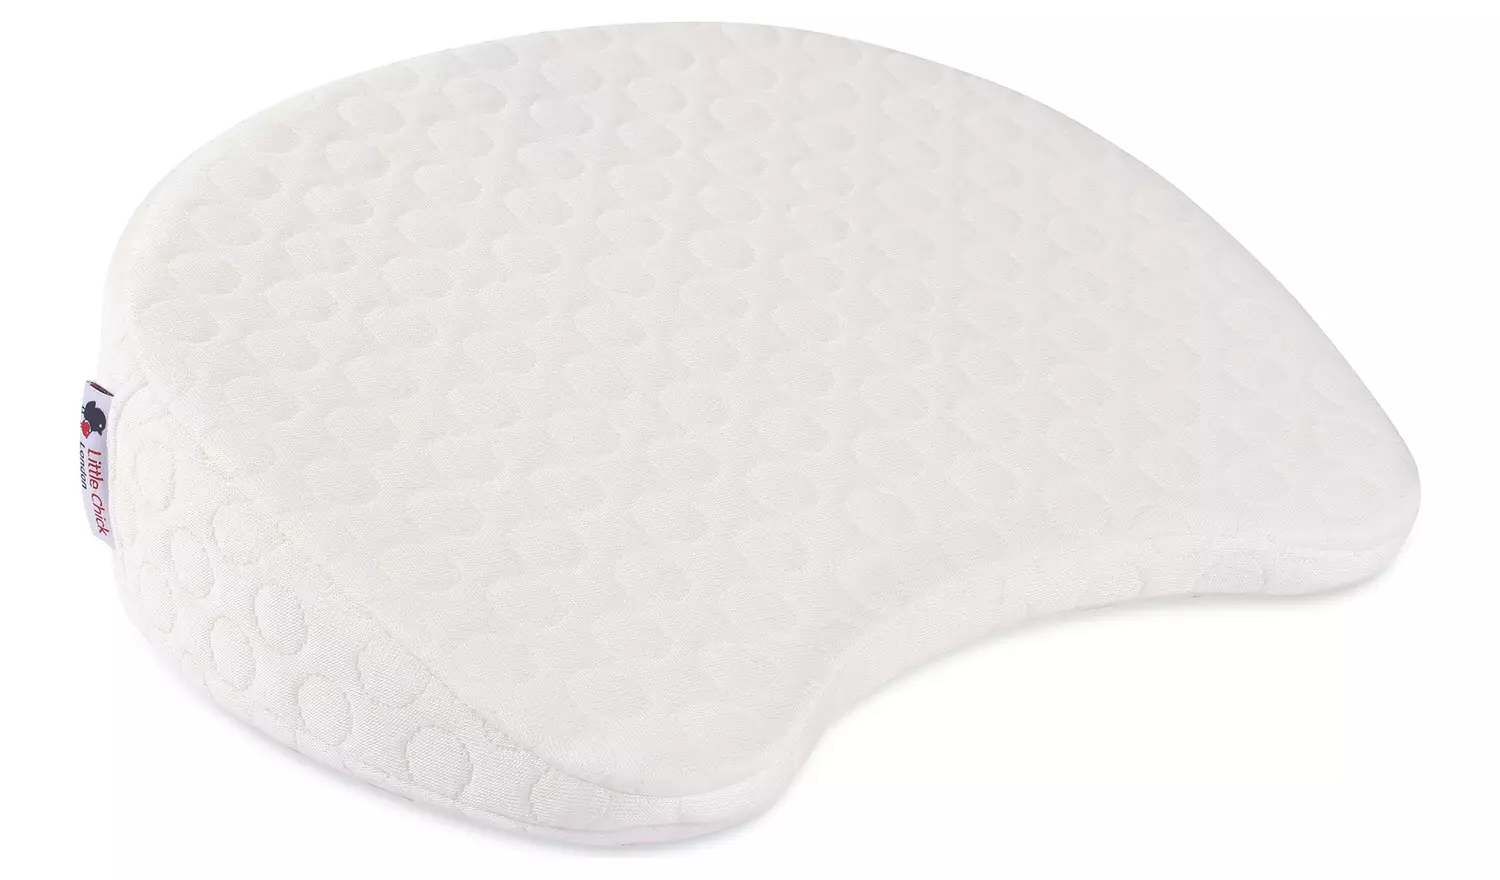 Little Chick 4 In 1 Maternity Support Pillow